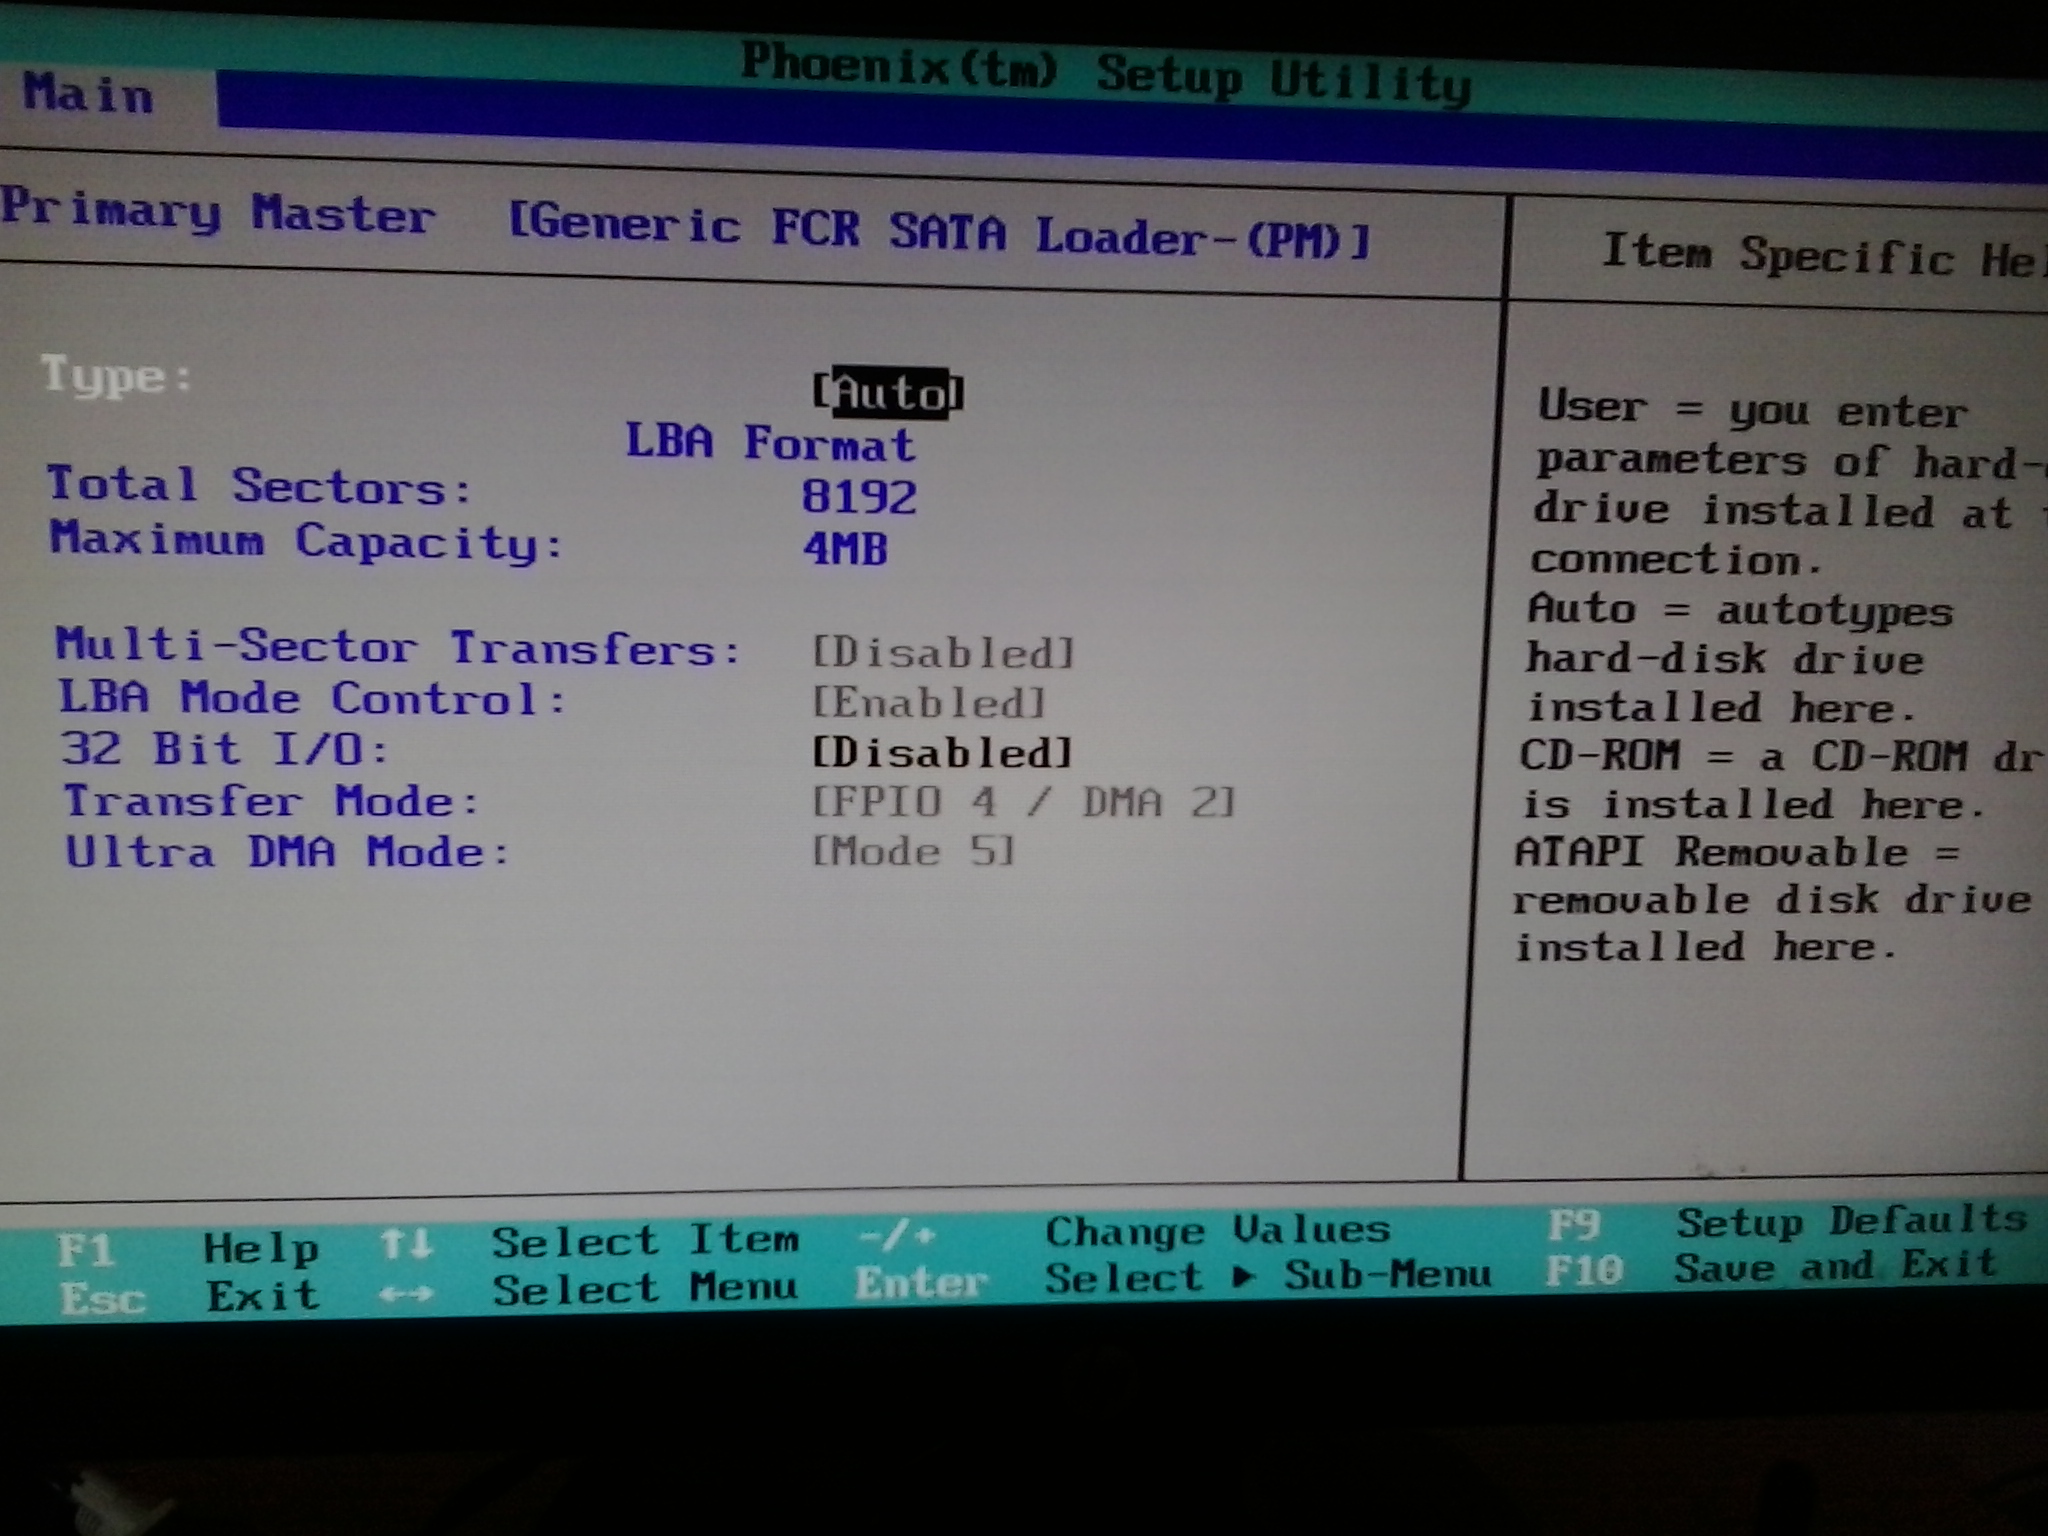 Bios status for the SSD fitPC2i